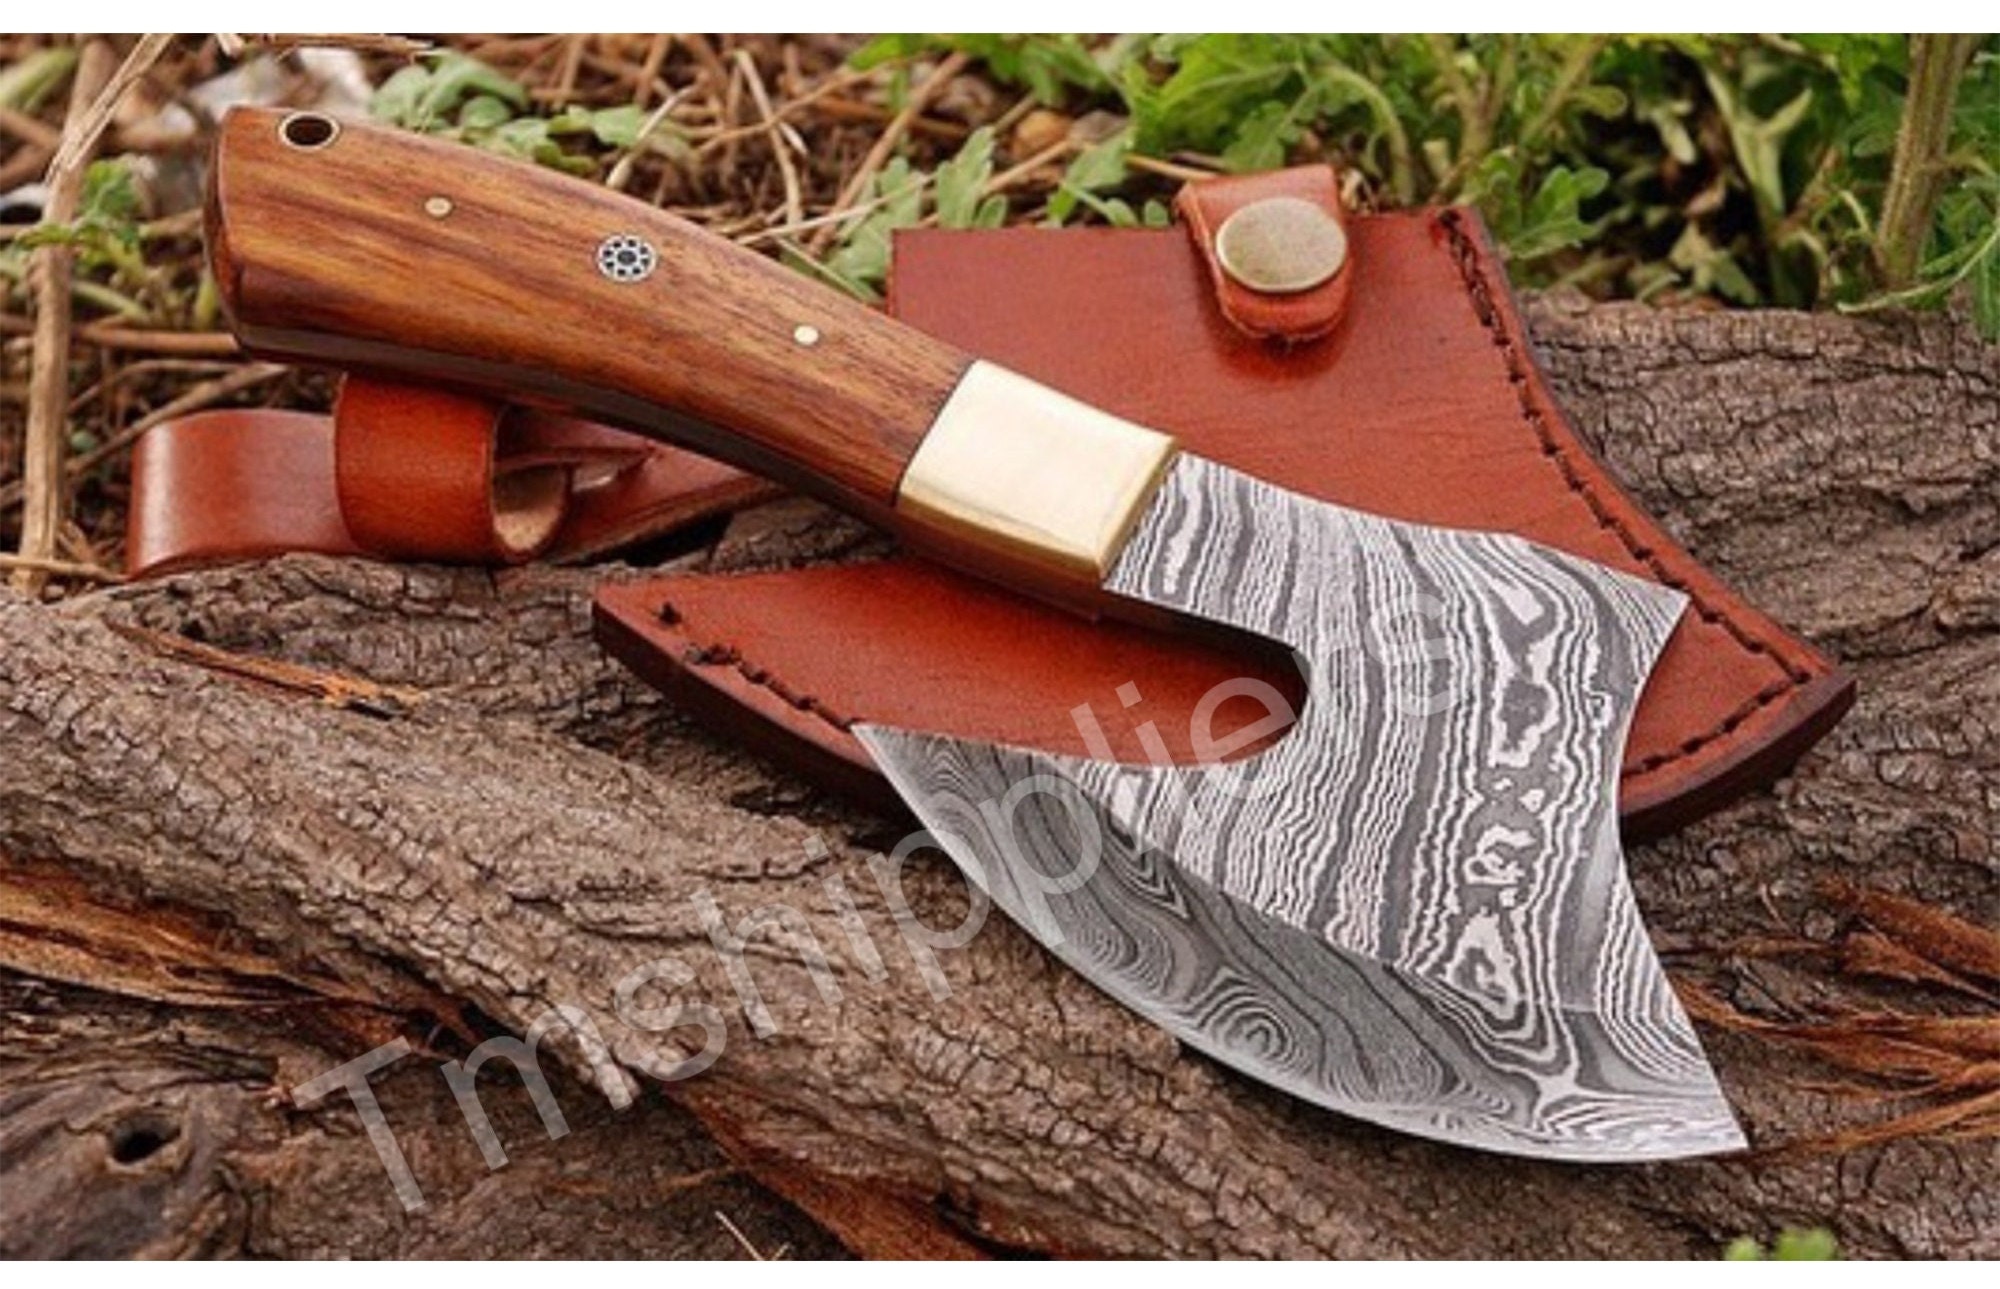 10.5 Hand Forged Damascus Steel Butcher Knife, Meat Cleaver, Wood Scale,  Cow Hide Leather Sheath with Belt Loop